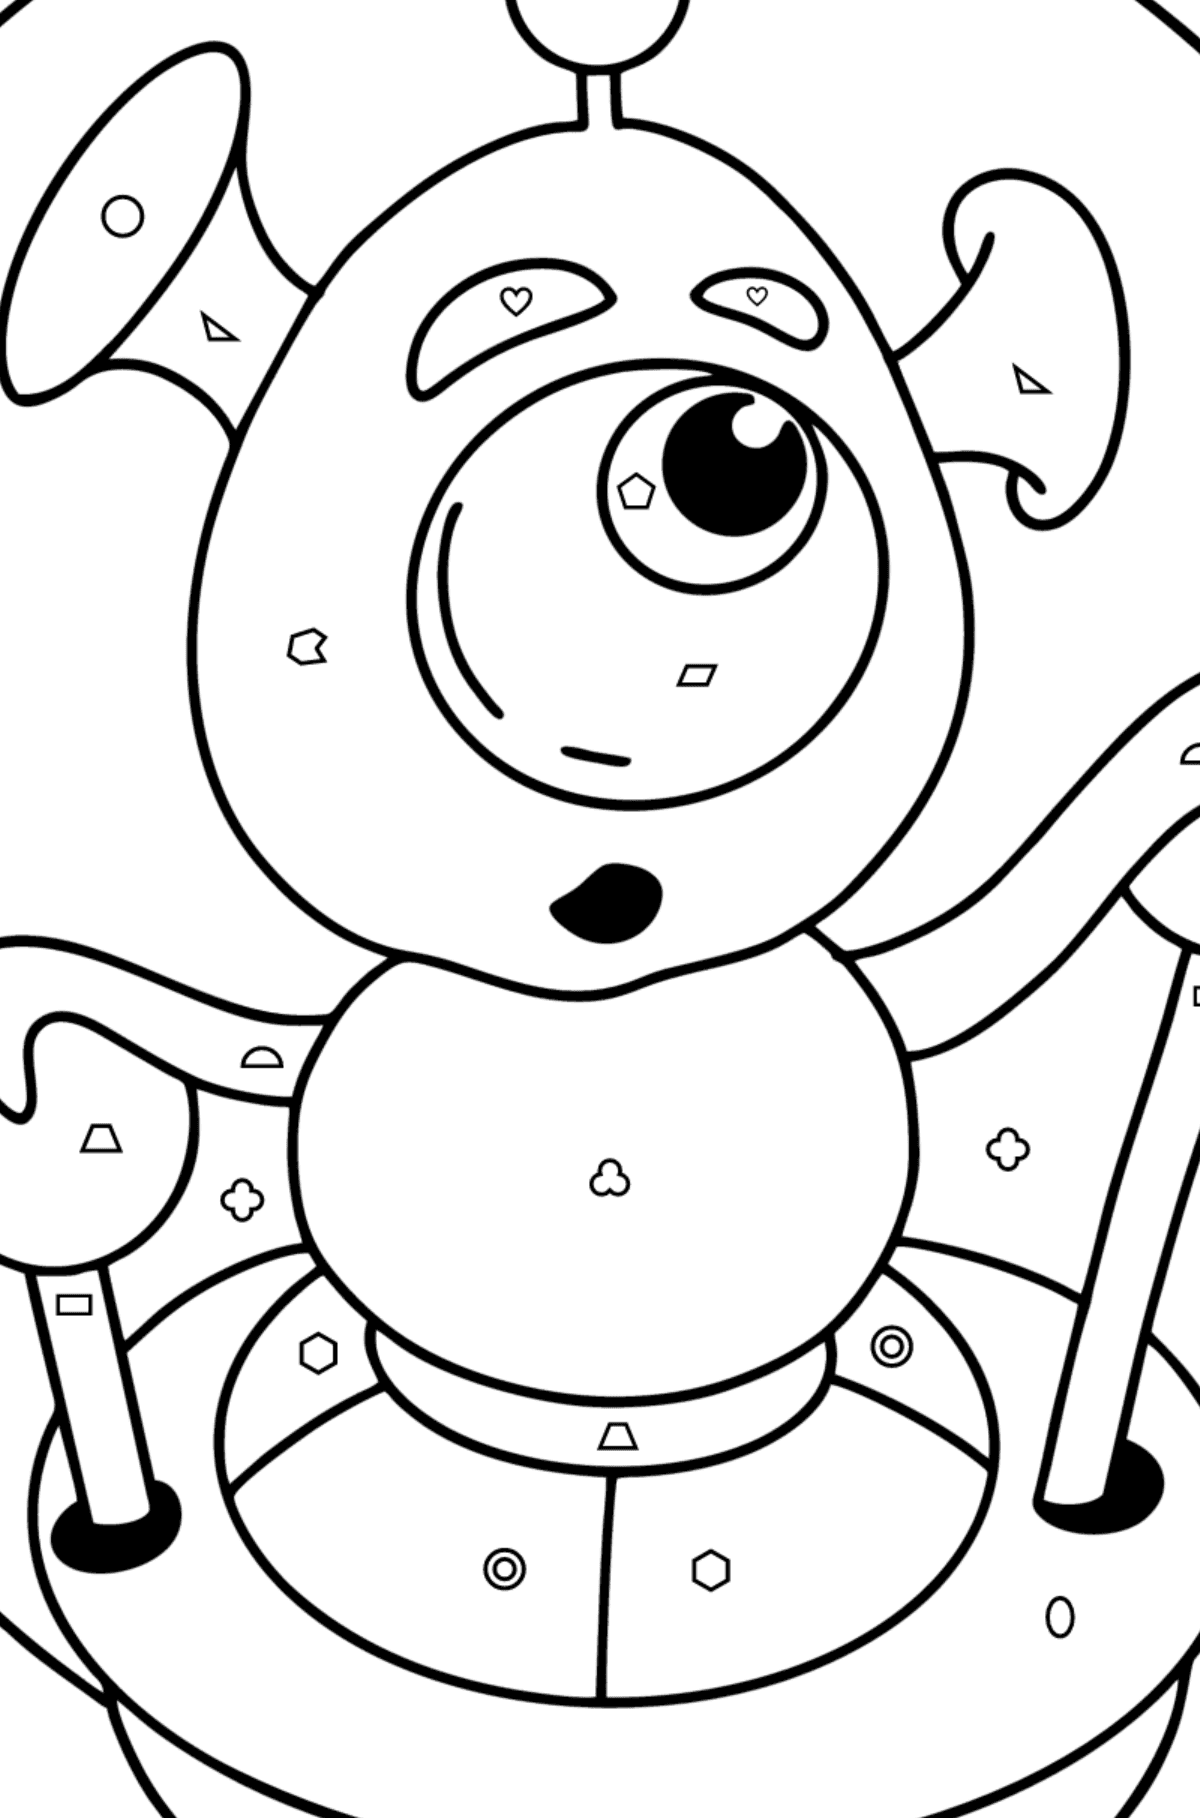 Baby Alien coloring pages - Coloring by Geometric Shapes for Kids